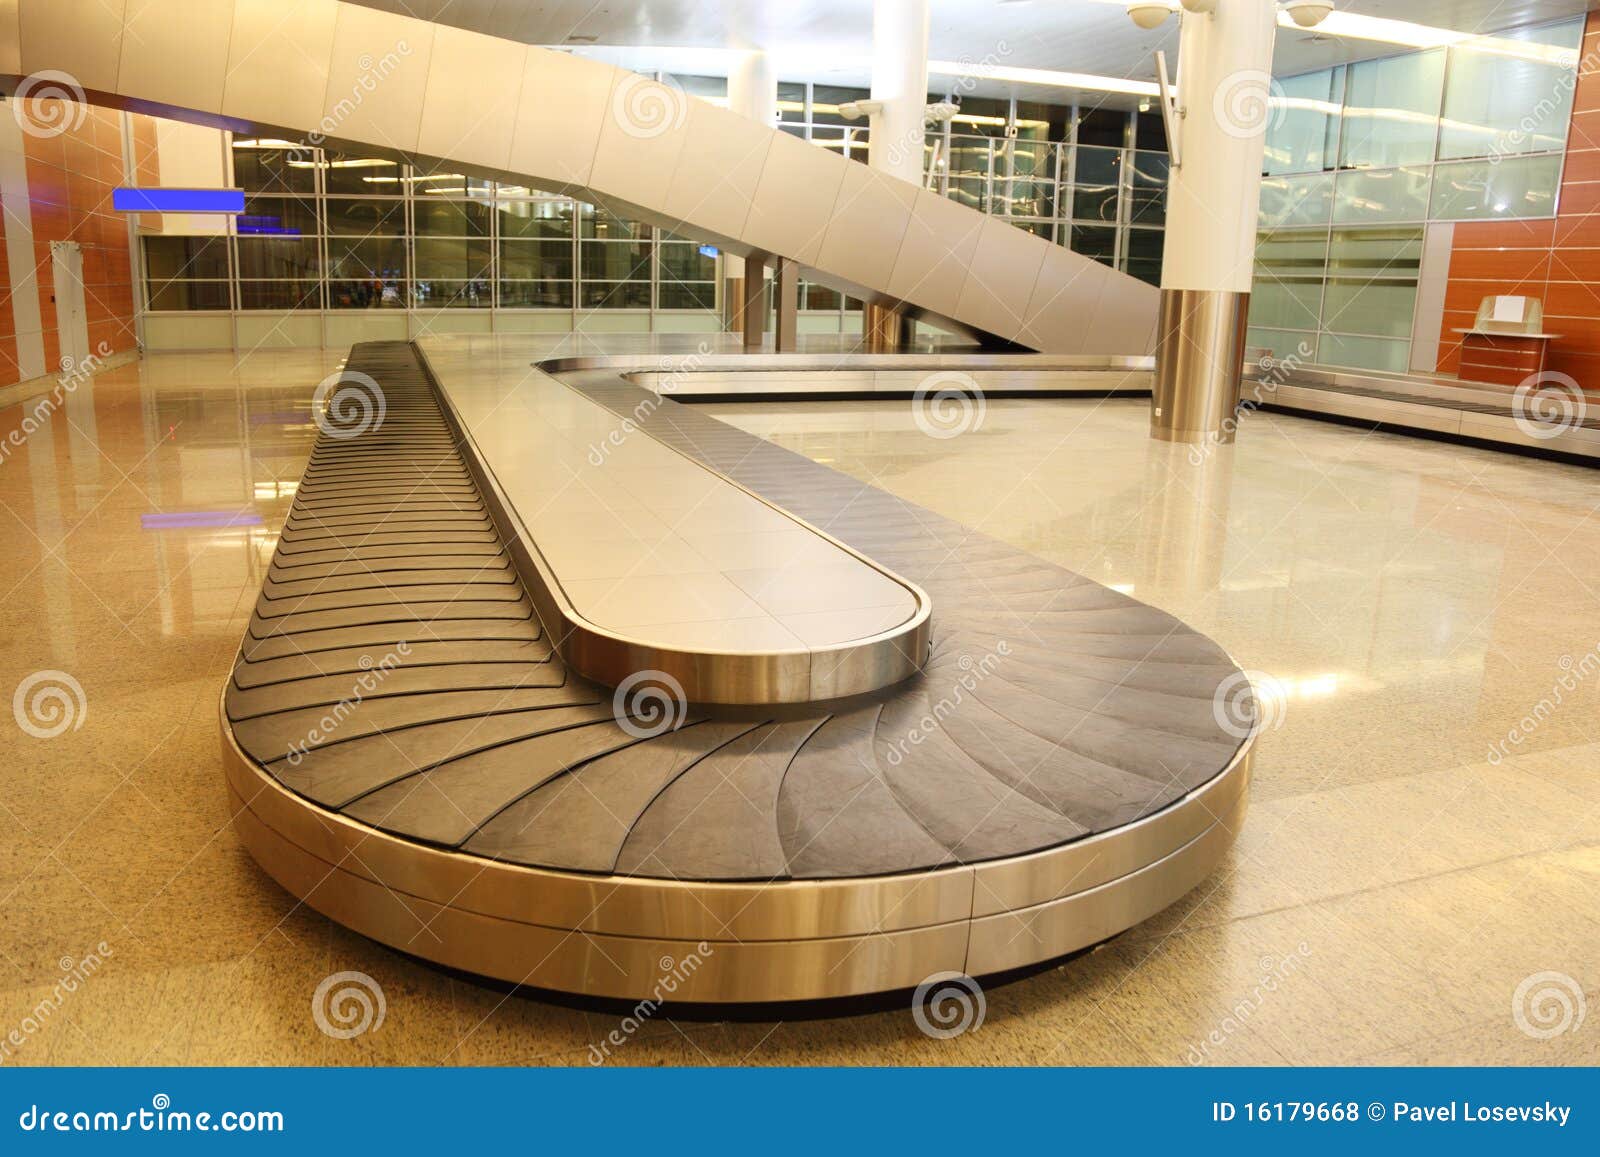 empty baggage carousel in airport hall